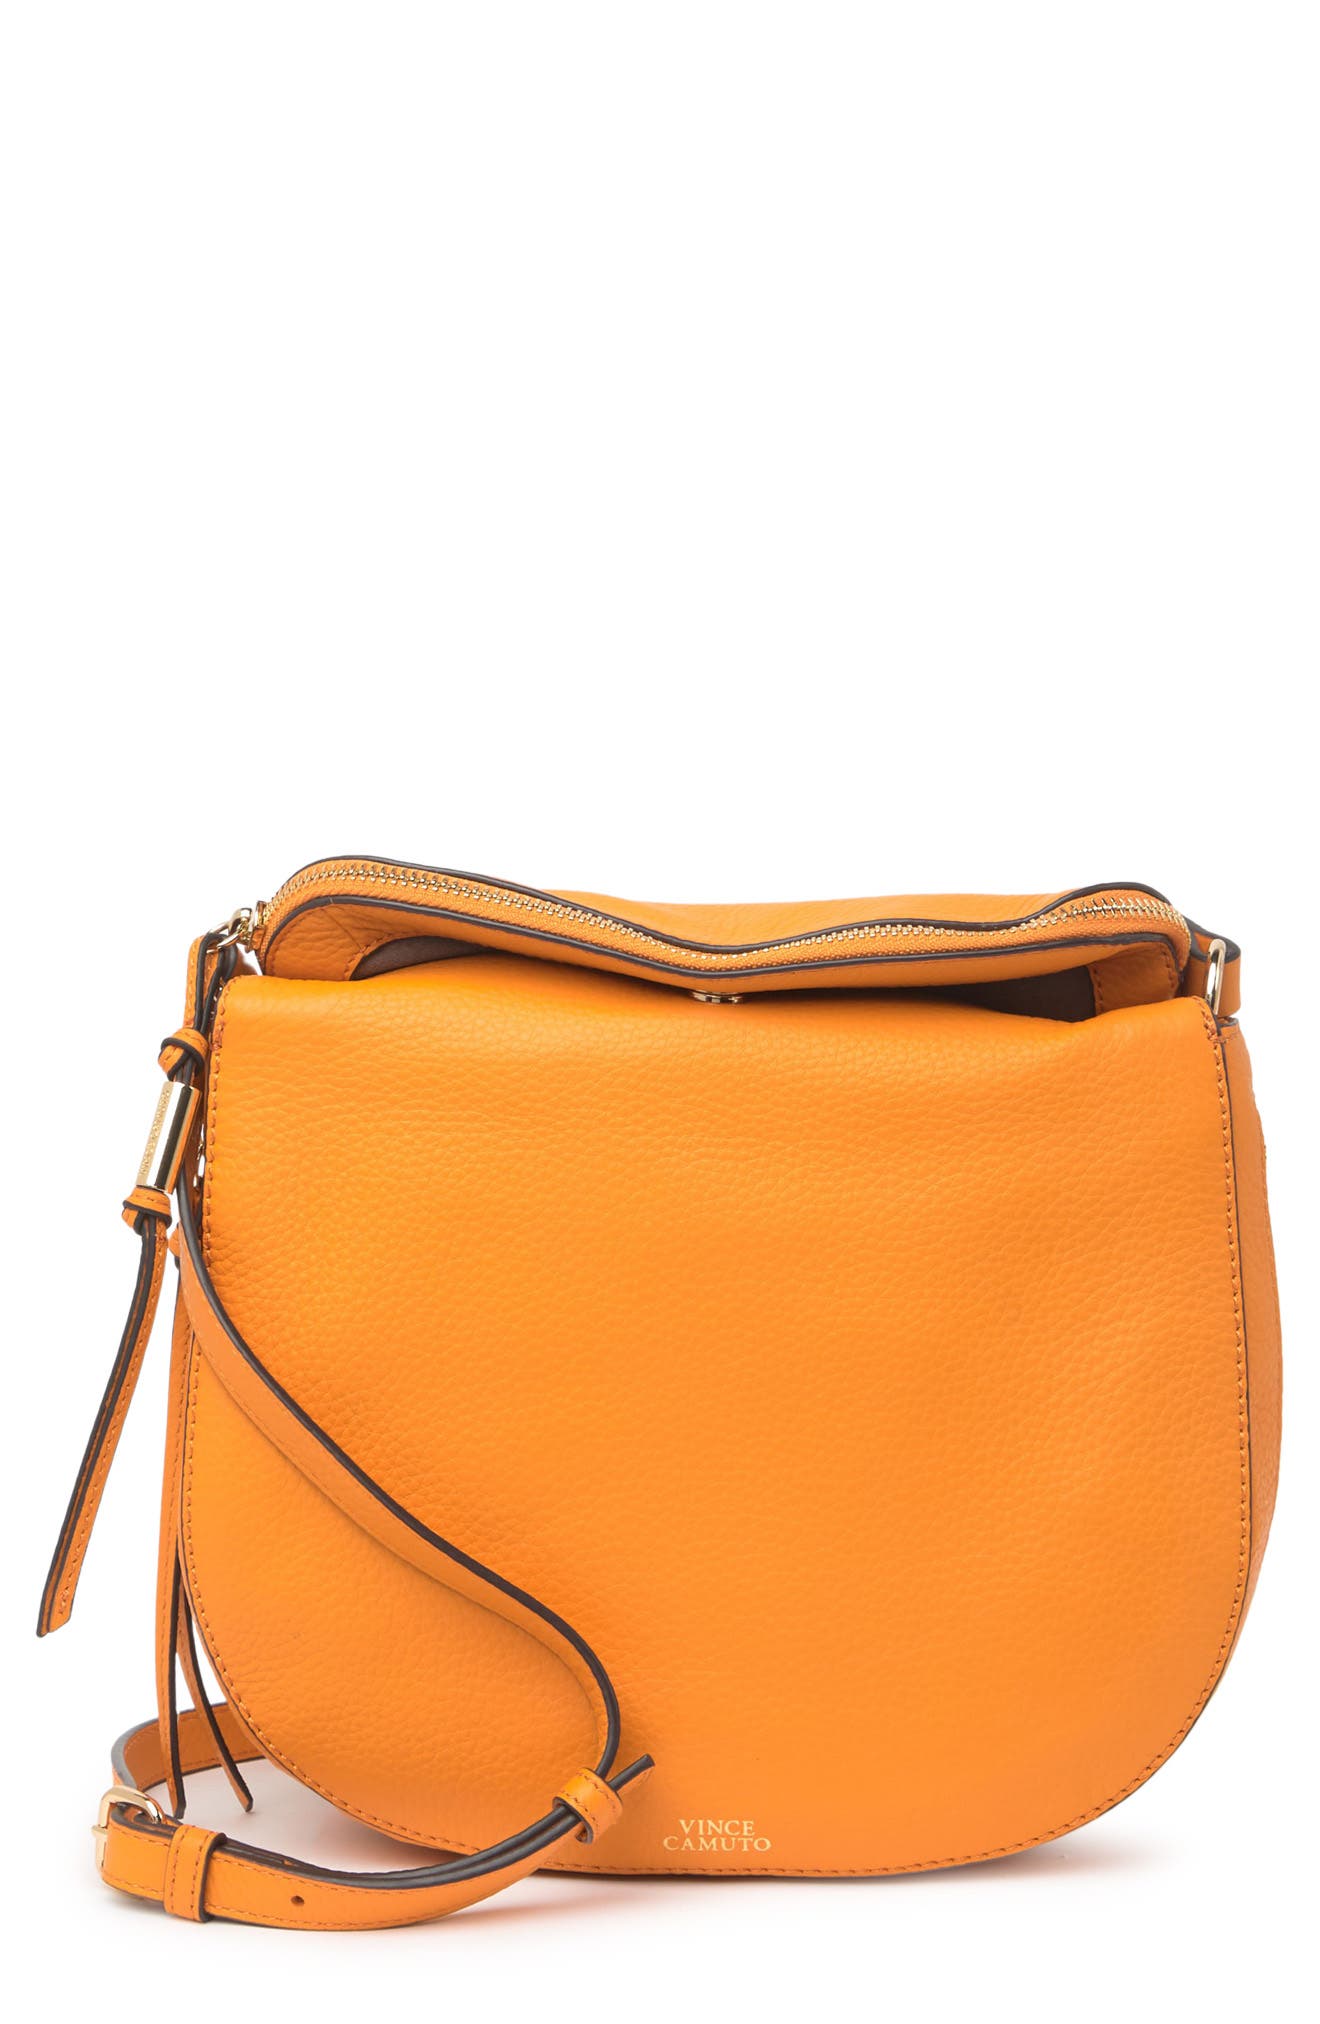 Vince Camuto Kenzy Large Leather Crossbody Bag In Cider 01 | ModeSens